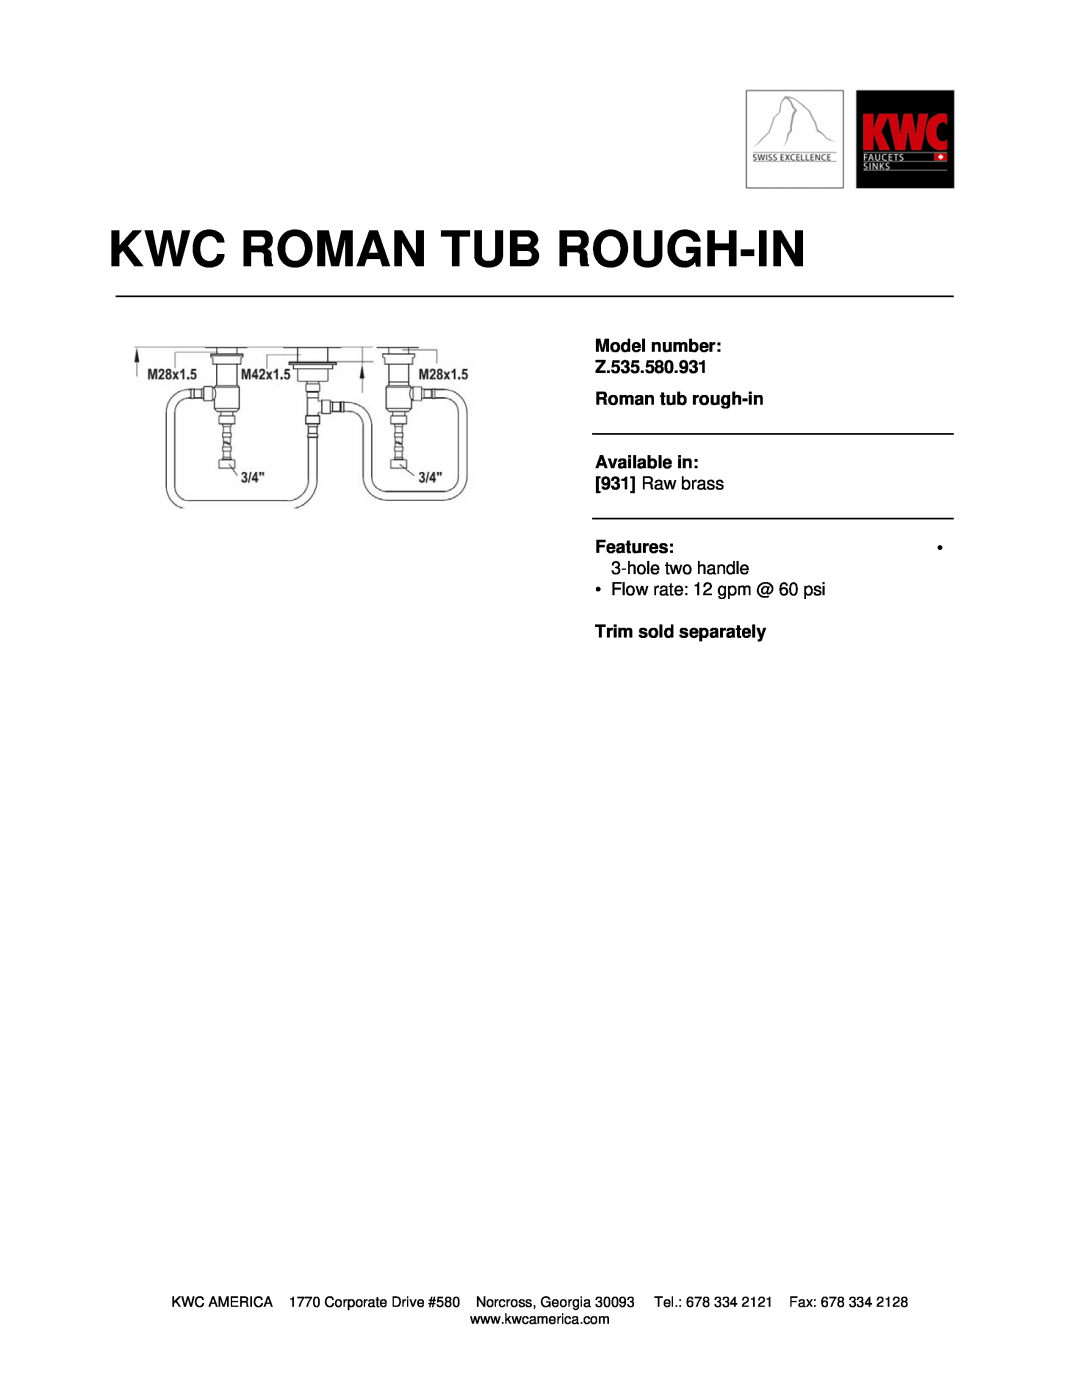 KWC manual Kwc Roman Tub Rough-In, Model number Z.535.580.931 Roman tub rough-in, Available in, Raw brass, Features 